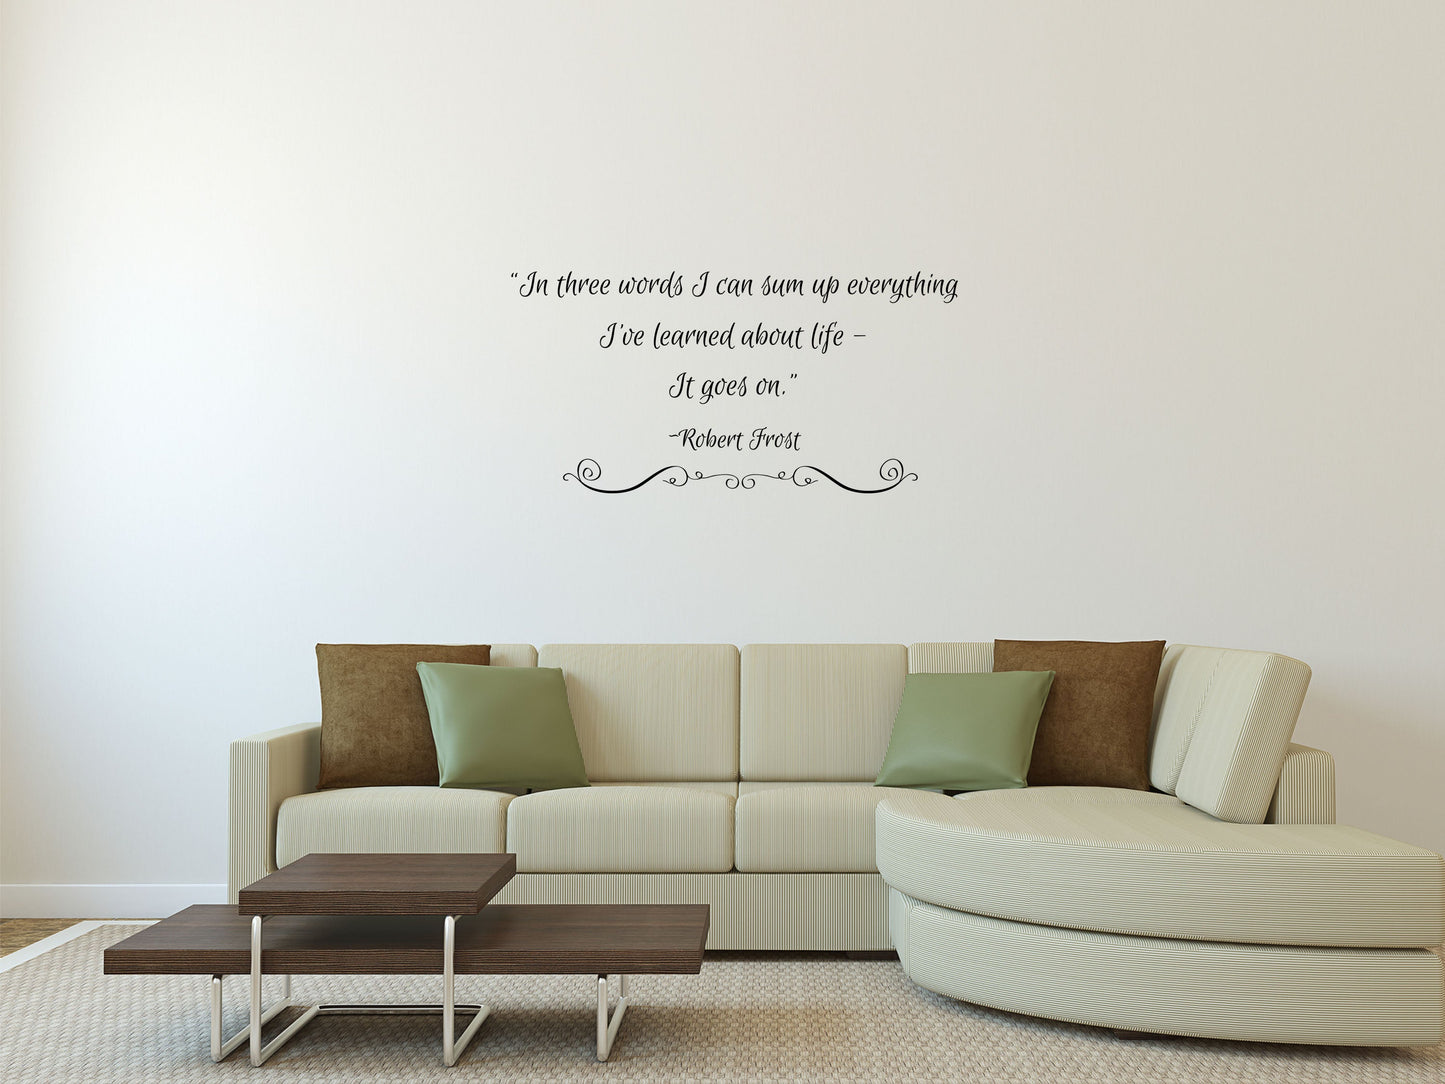 Robert Frost Decal Wall Vinyl Decal - Living Room Decal - Inspirational Wall Decal - Vinyl Wall Art - Wall Quote Decal Vinyl Wall Decal Inspirational Wall Signs 